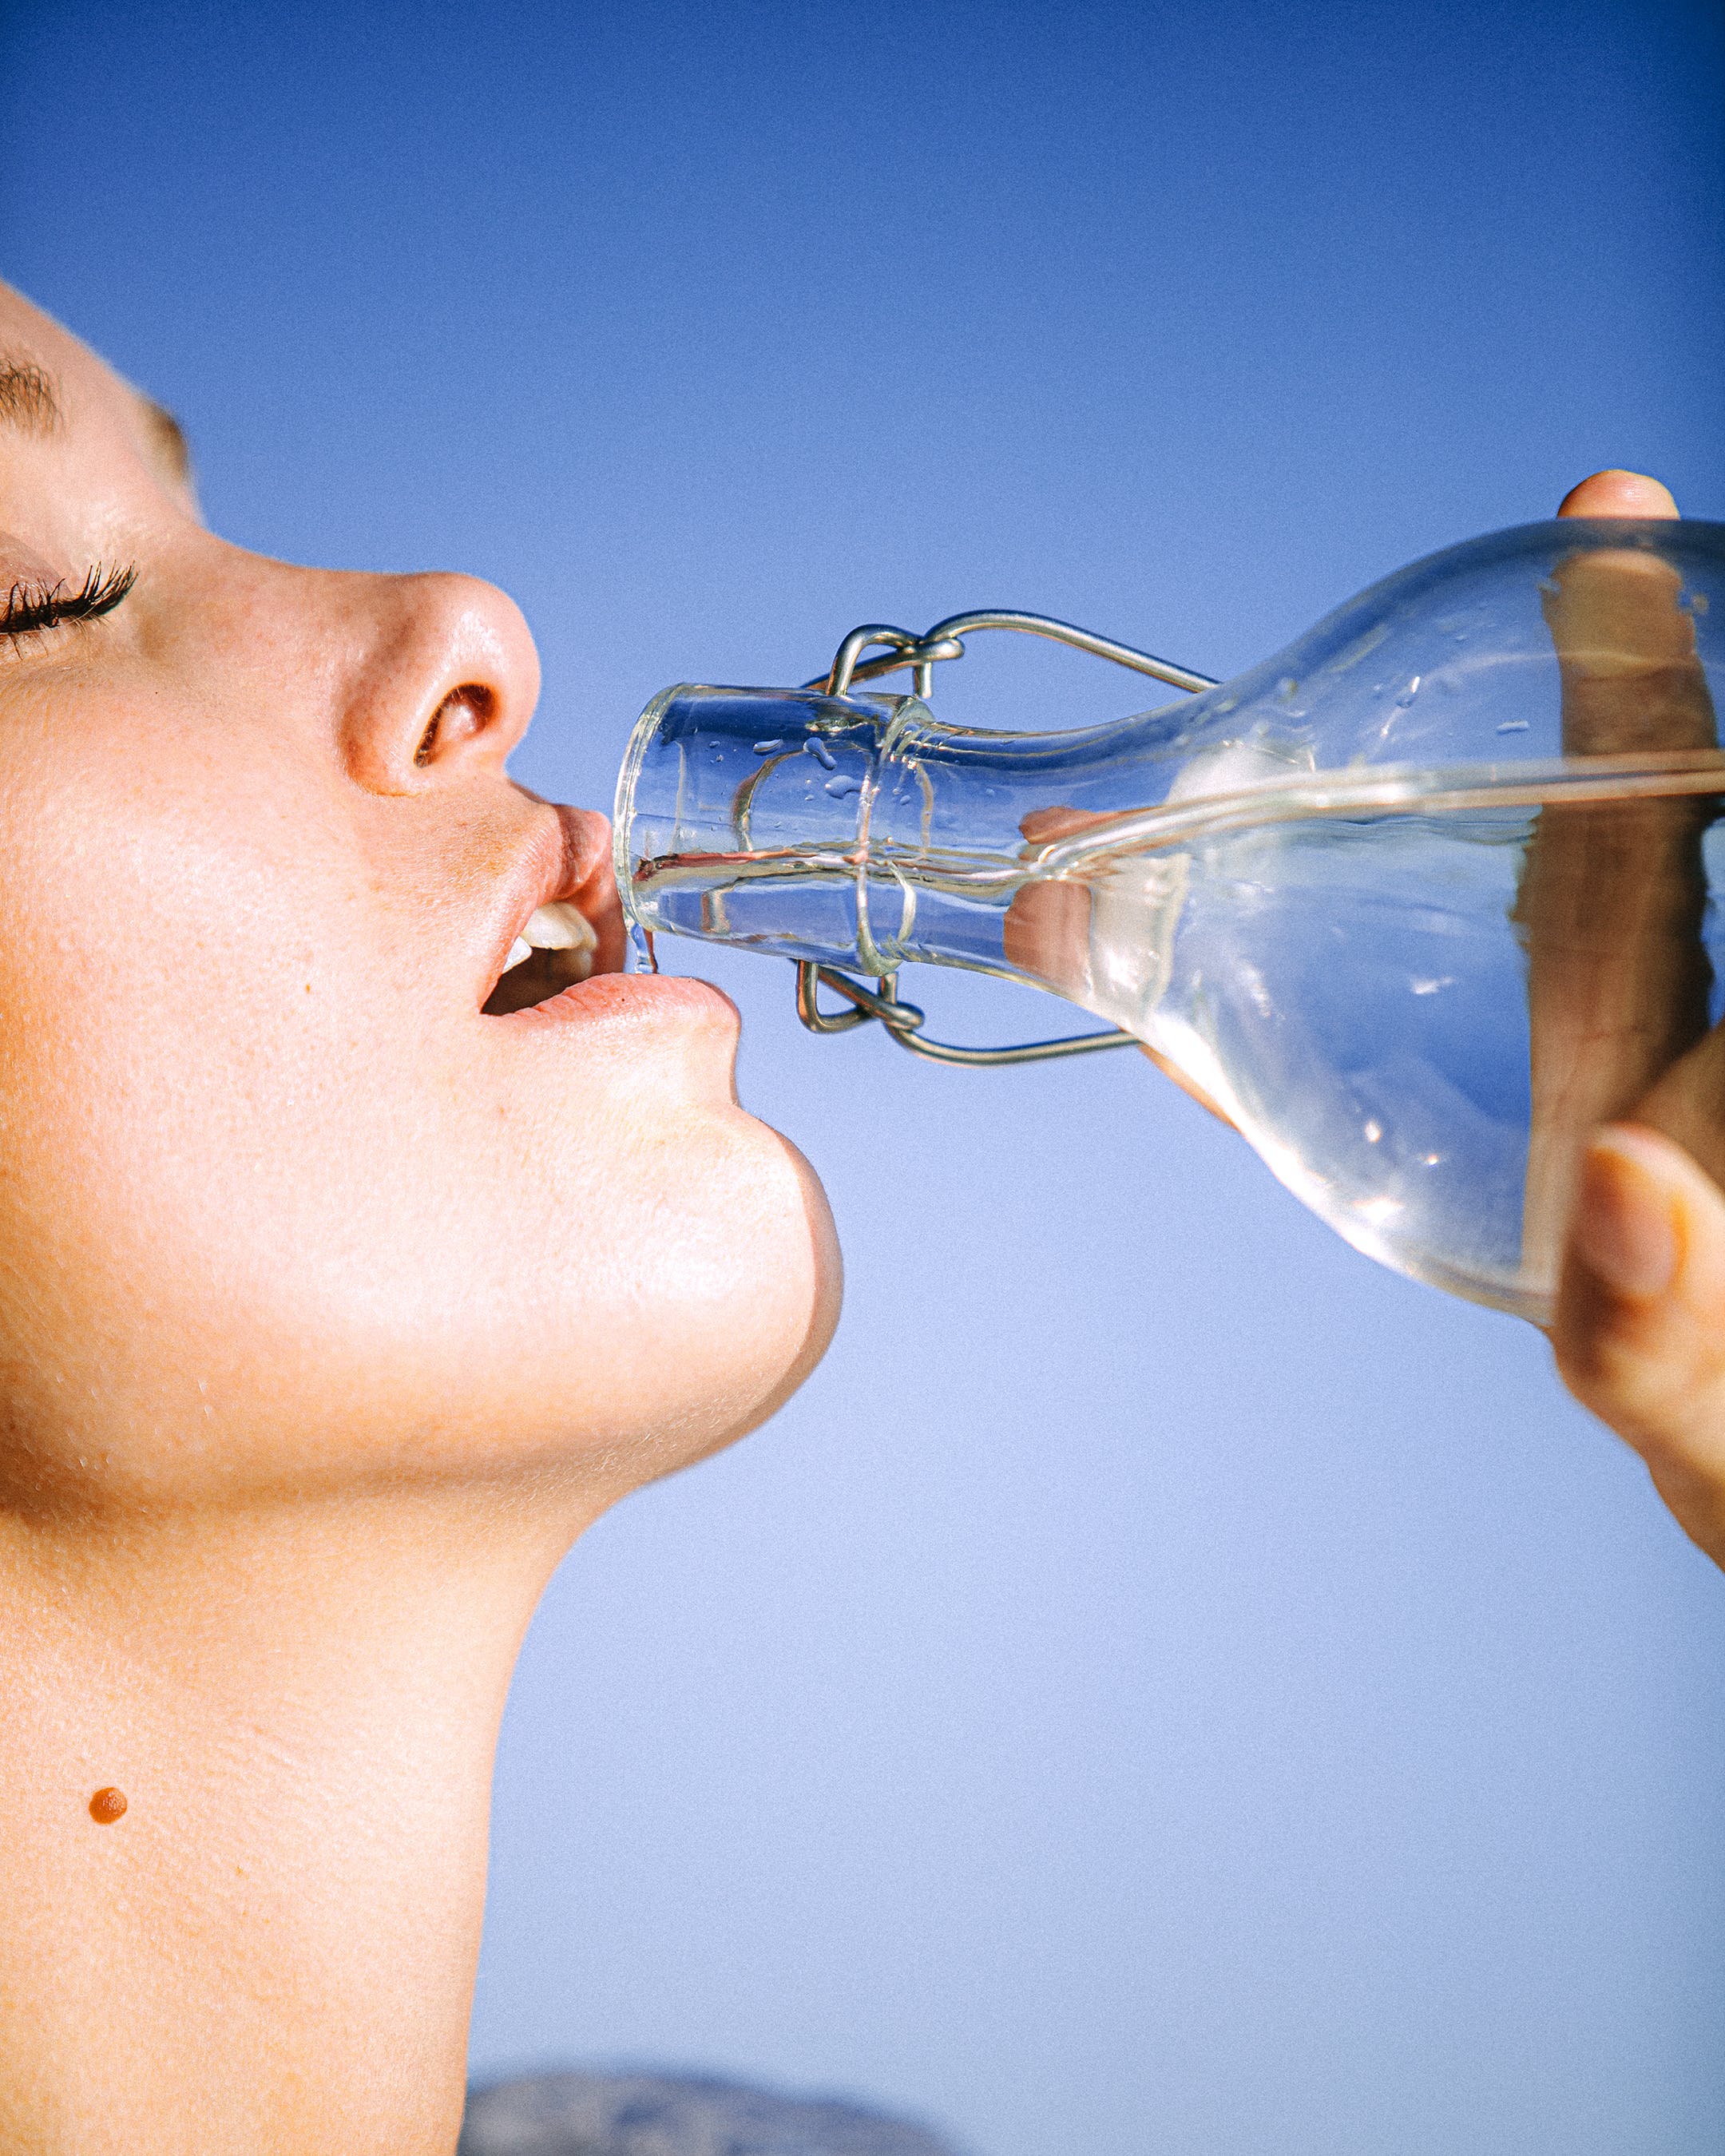 How To Prevent Transepidermal Water Loss